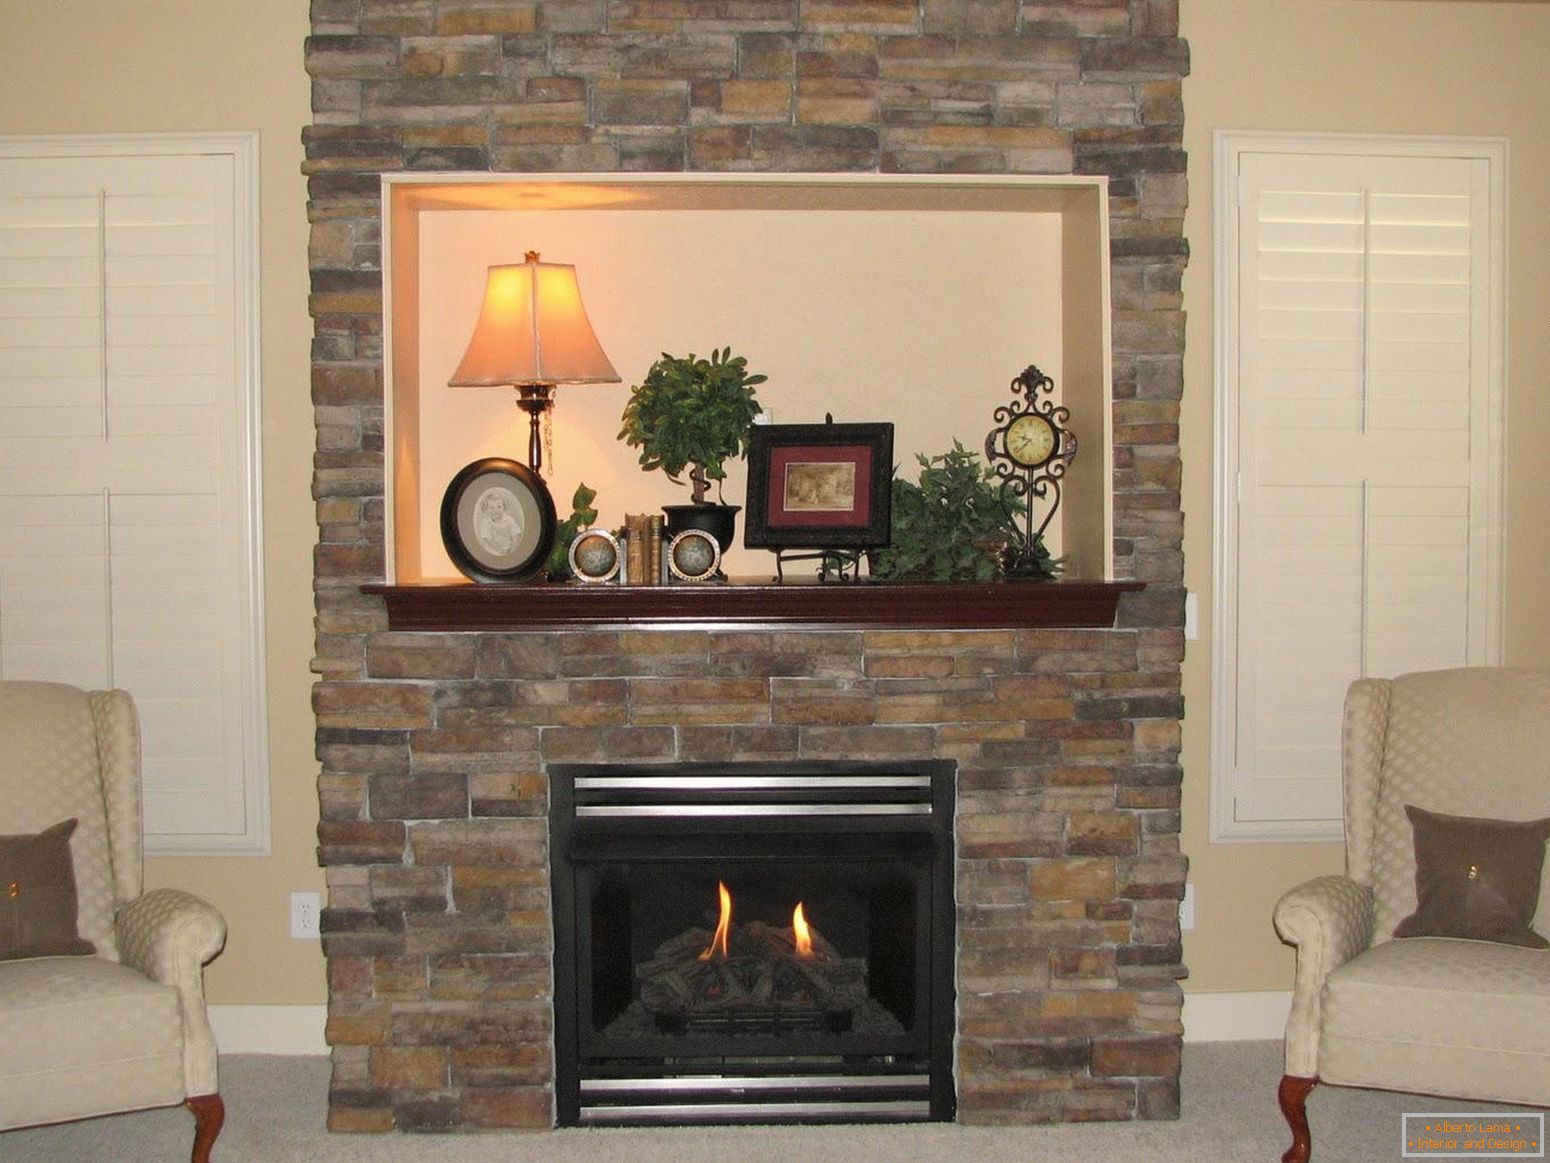 Fireplace with stone facade in the interior